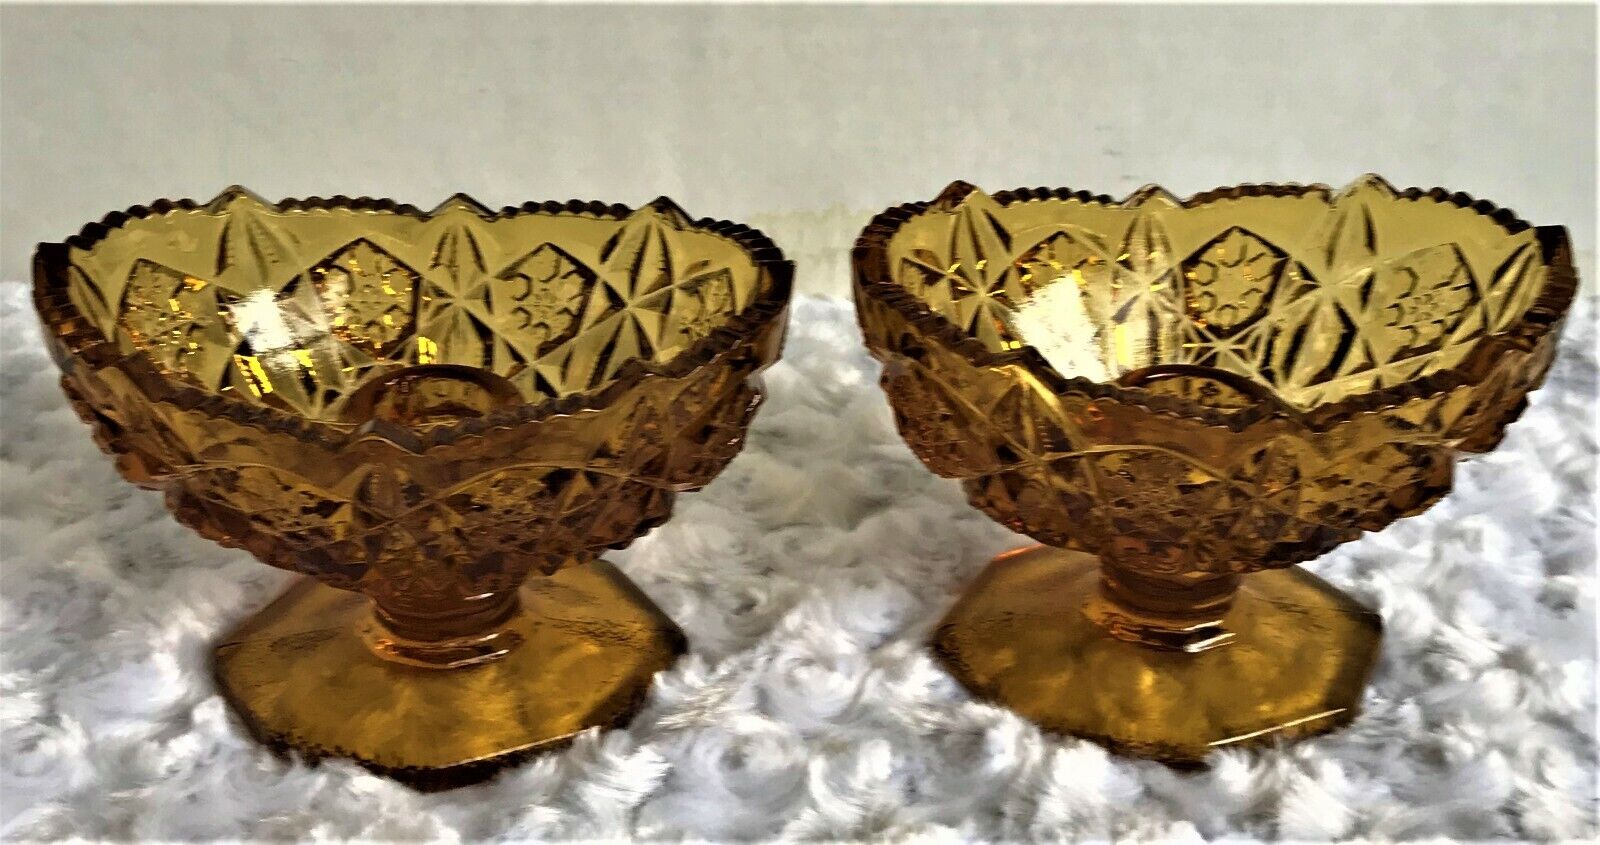 PAIR OF VINTAGE AMBER GLASS CANDLE HOLDERS DISH KEMPLE WHEATON TOLTEC PATTERN